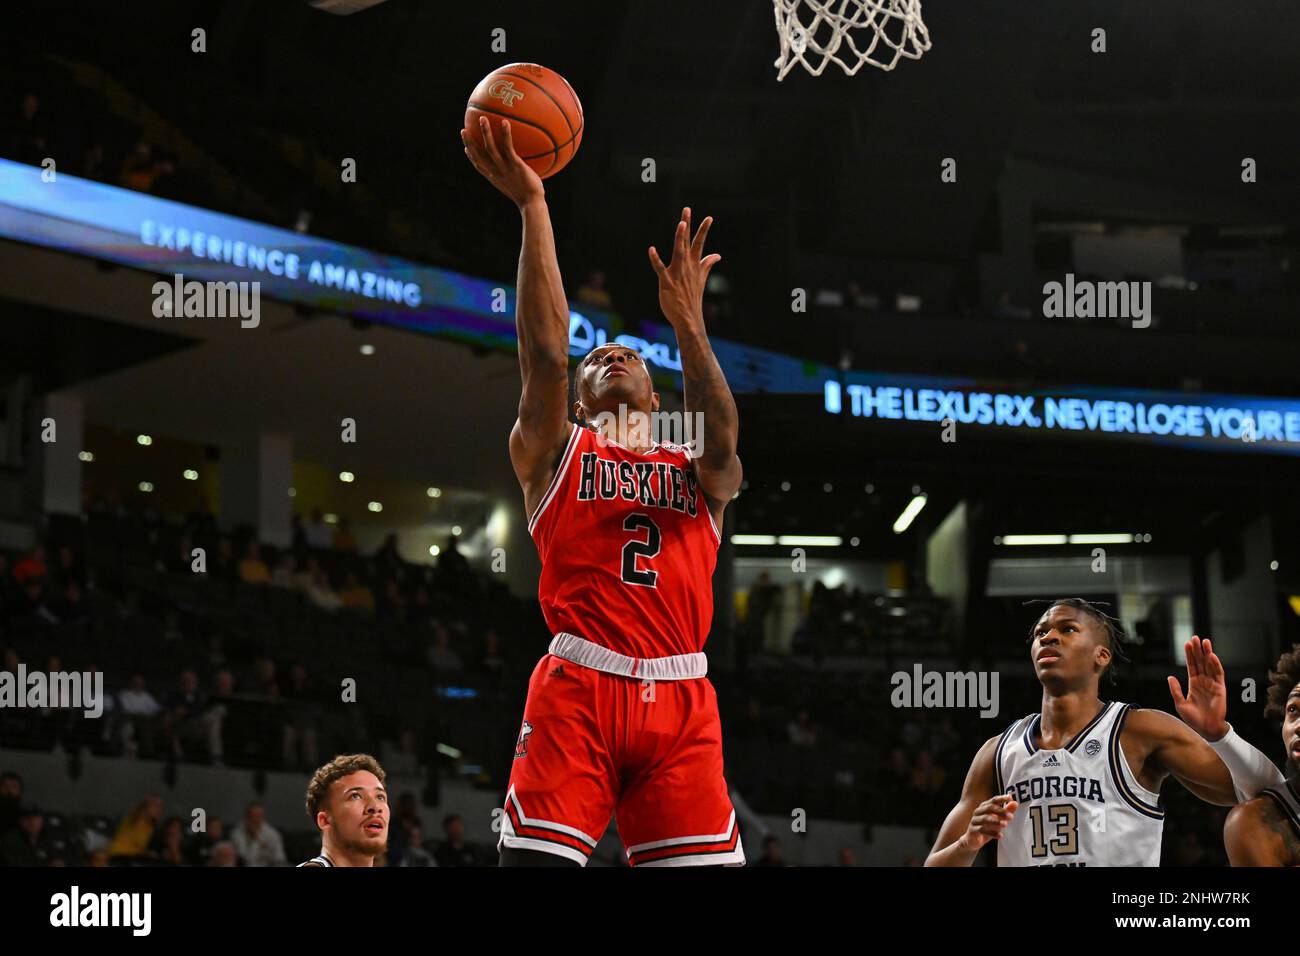 ATLANTA, GA – NOVEMBER 17: Northern Illinois guard Zarique Nutter (2)  drives to the basket during the college basketball game between the  Northern Illinois Huskies and the Georgia Tech Yellow Jackets on